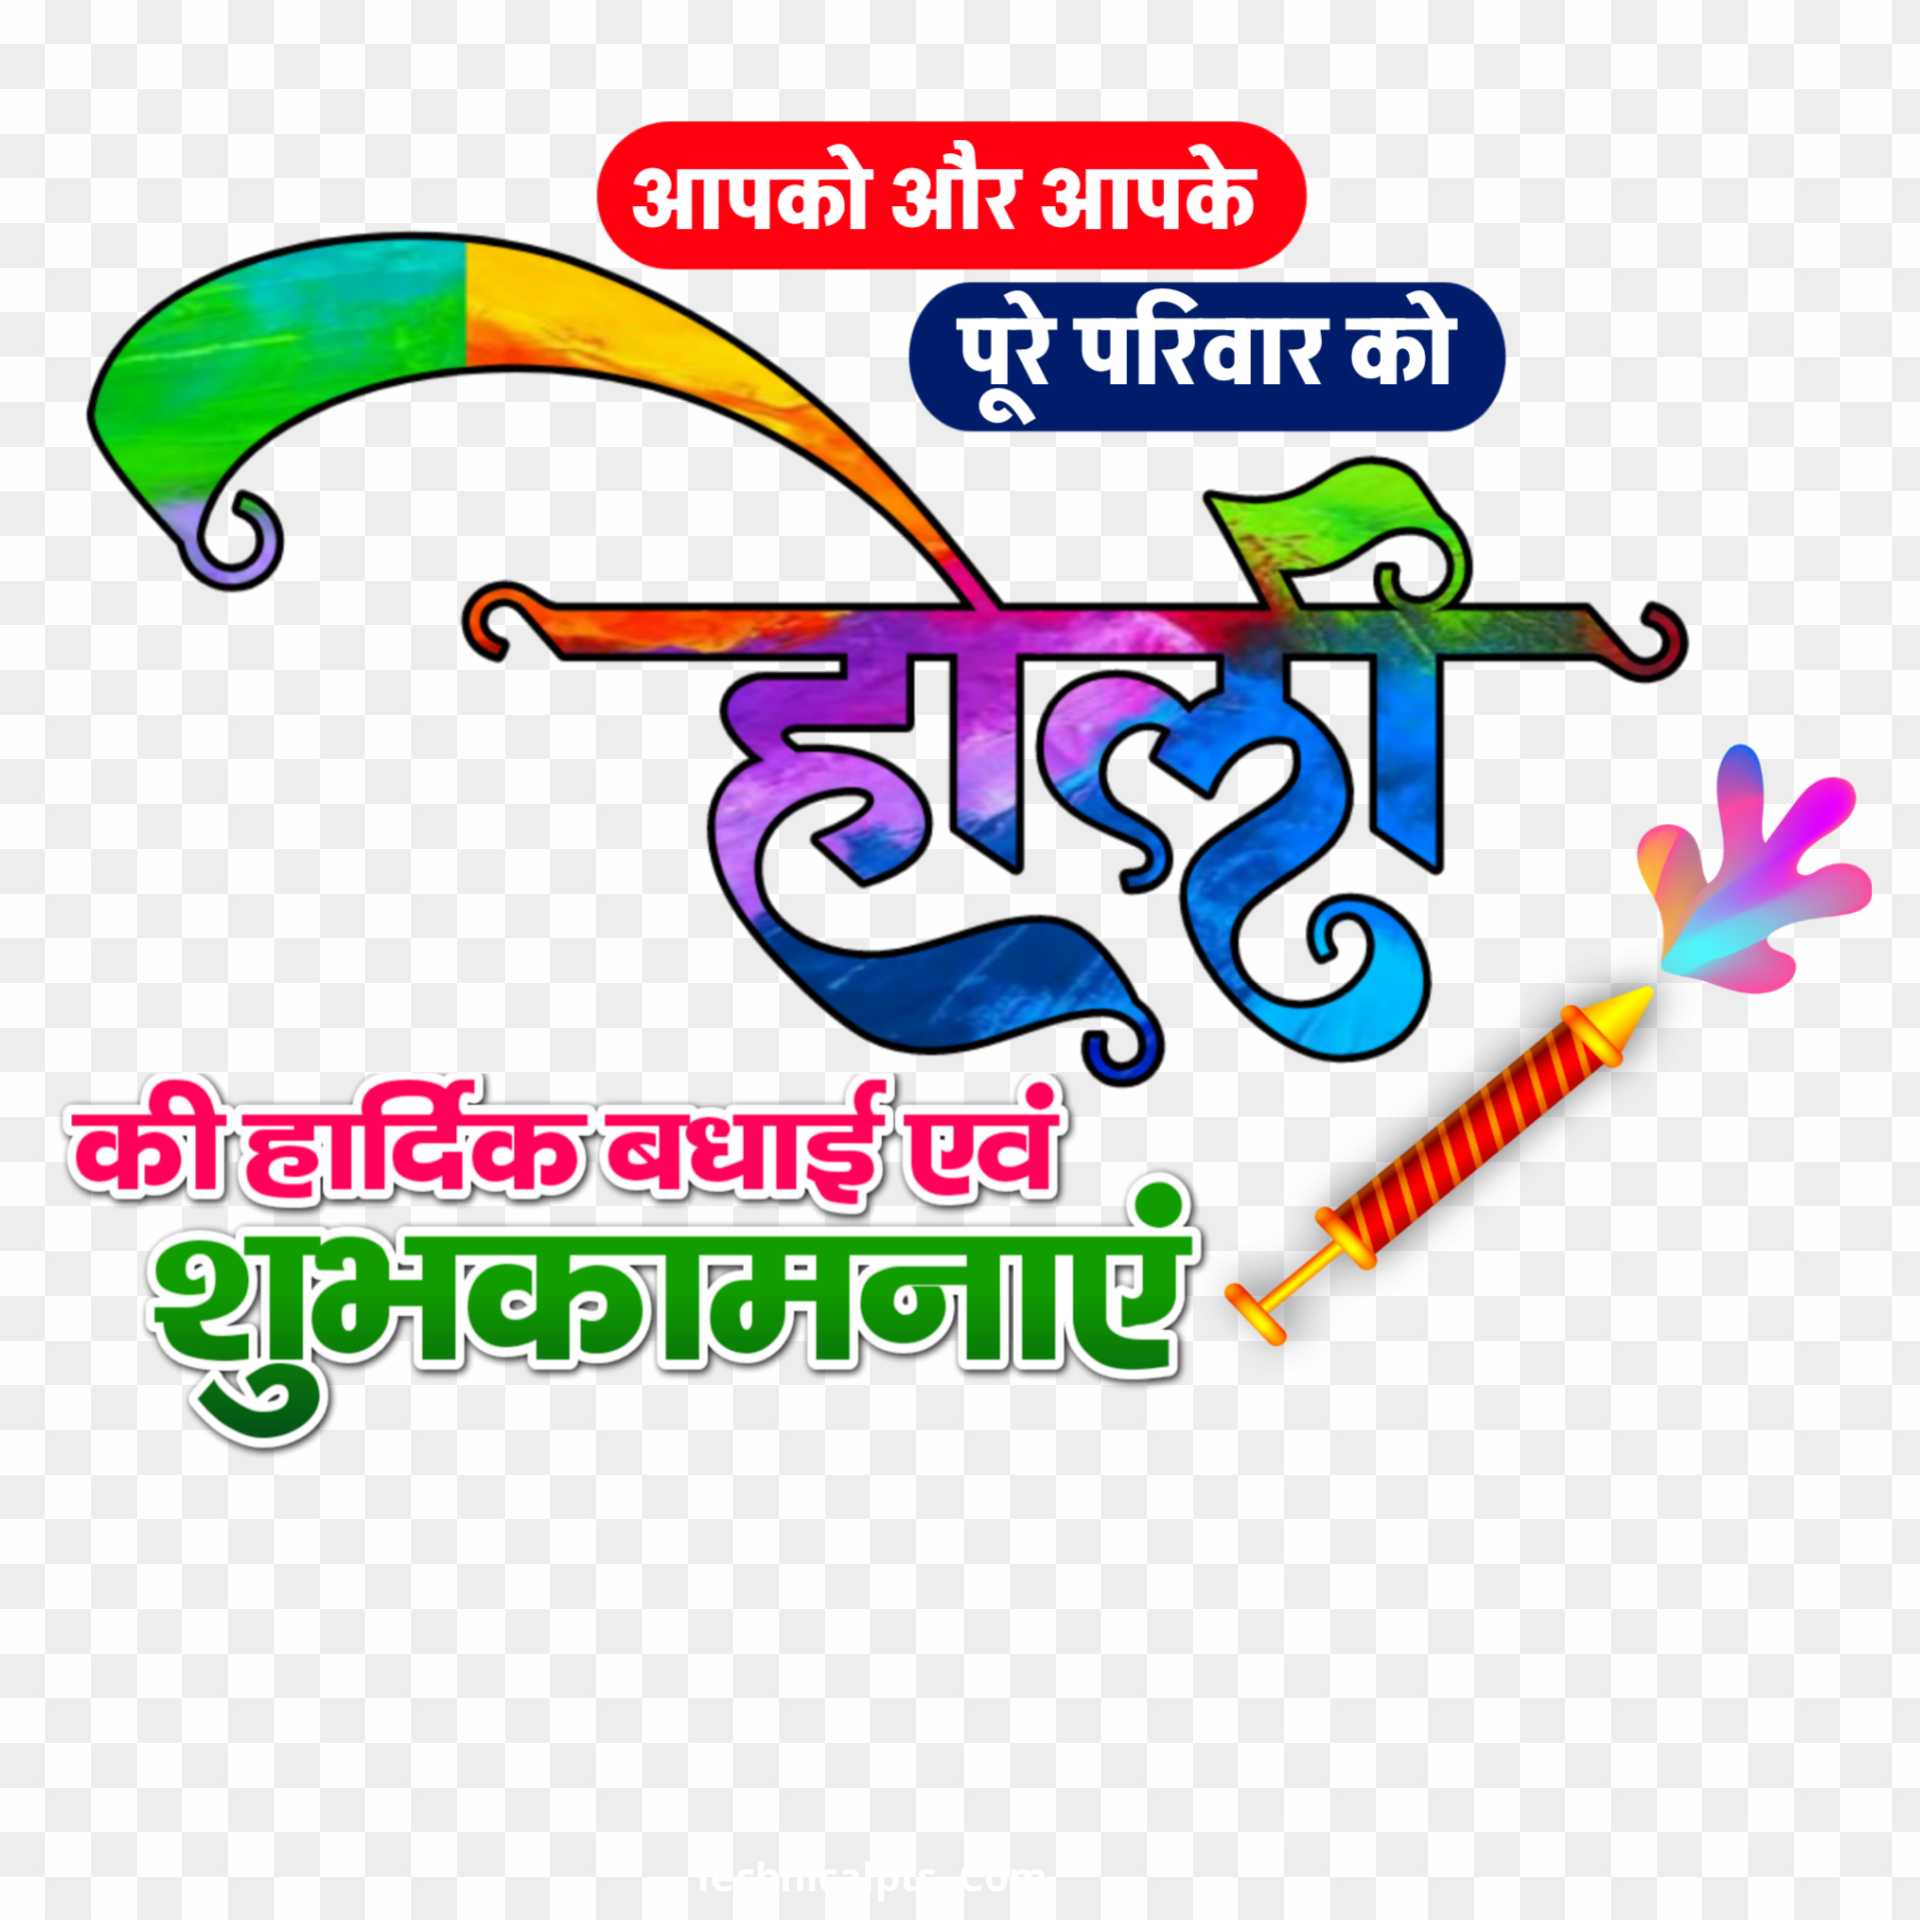 Happy Holi in Hindi Png Images 